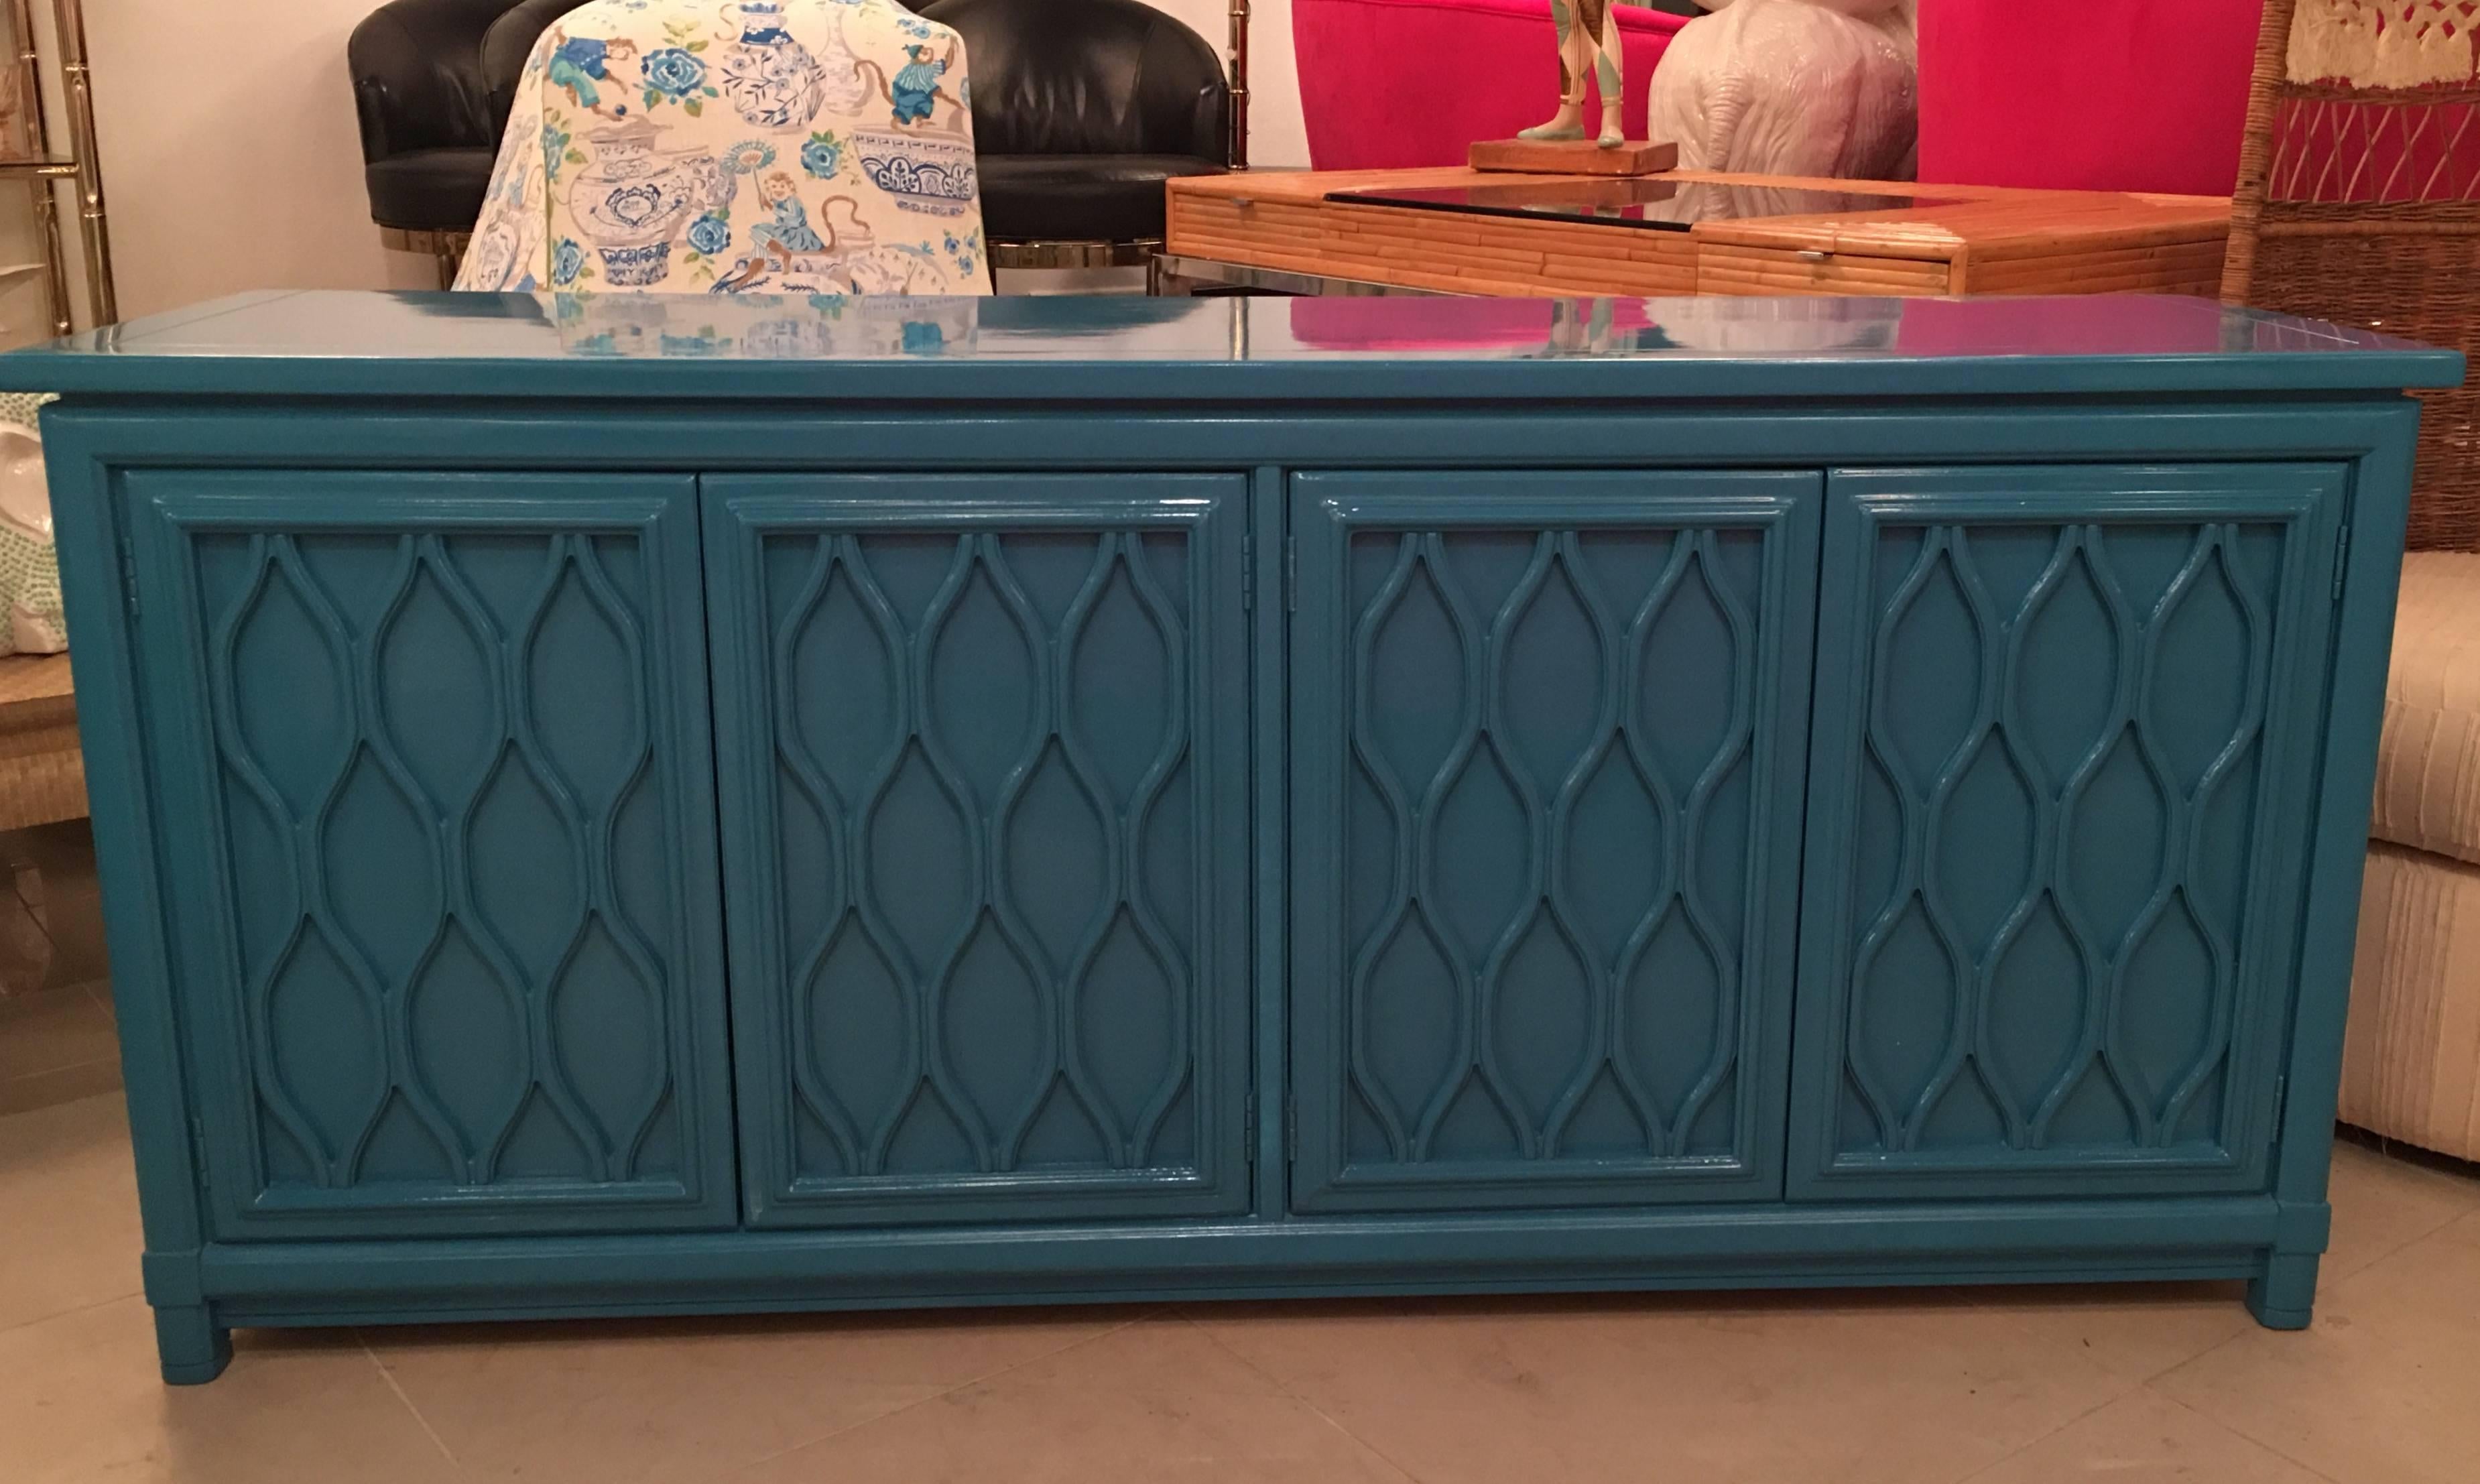 Amazing vintage professionally newly lacquered Hollywood Regency credenza, buffet, sideboard, dresser. Drawers on one side, shelves on the other. There may be minor imperfections to the newly lacquered vintage furniture piece.